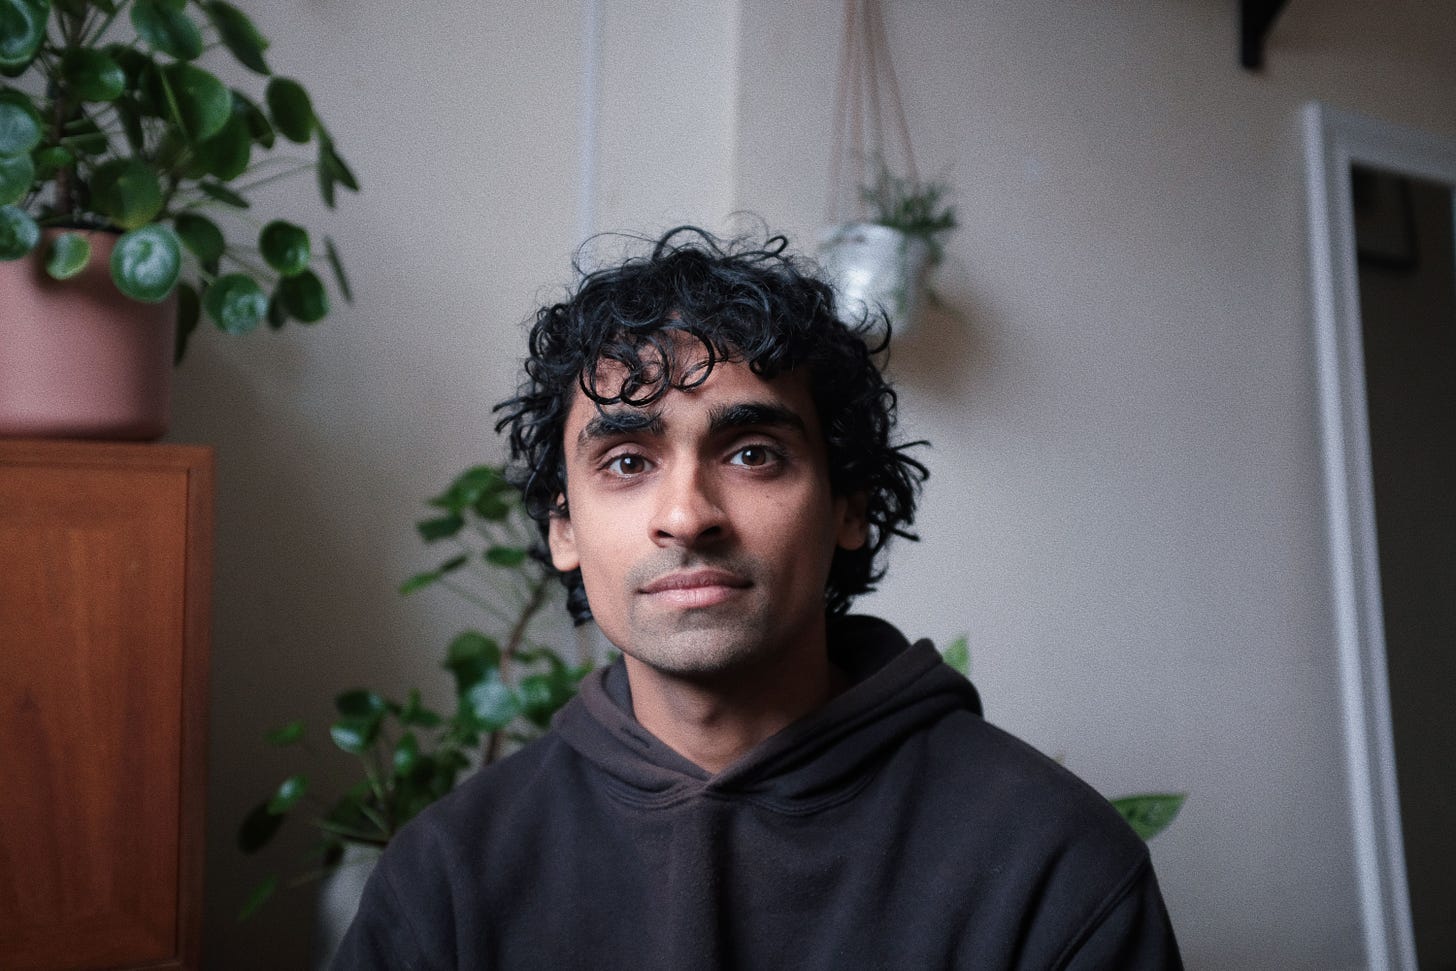 This is a headshot of Neef, who is seated in front of some indoor green plants. He has brown skin, dark-brown eyes, and short black curly hair. He's wearing a brown-grey hoodie sweater. He's staring directly into the camera with his mouth closed, and looks relaxed.